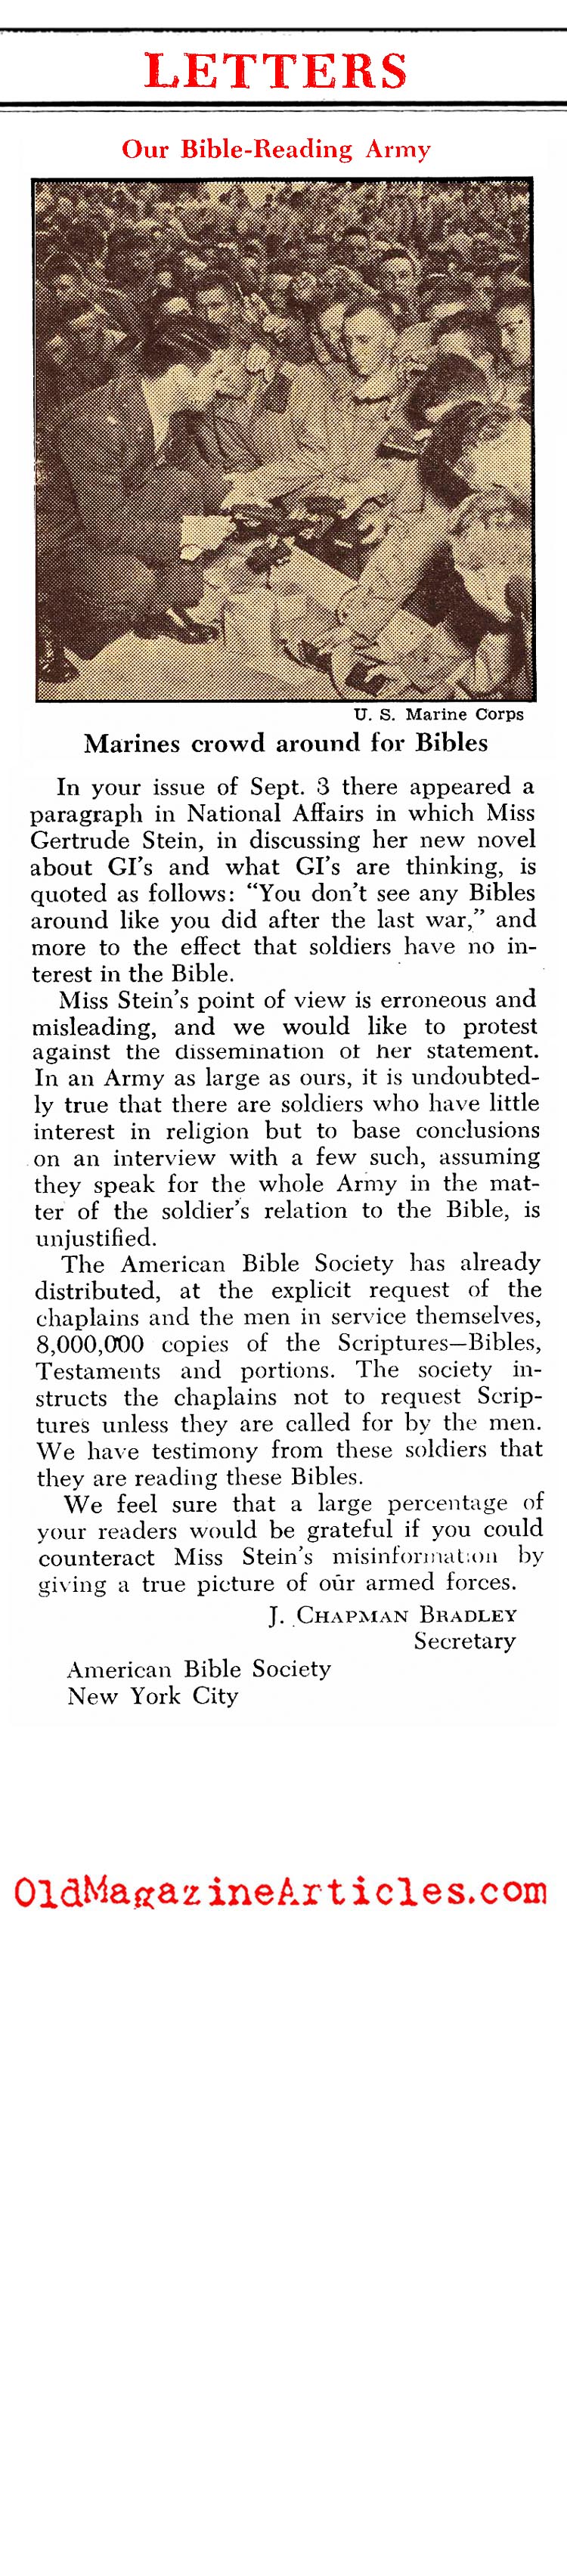 The Difference Between GIs and Doughboys (Newsweek Magazine, 1945)